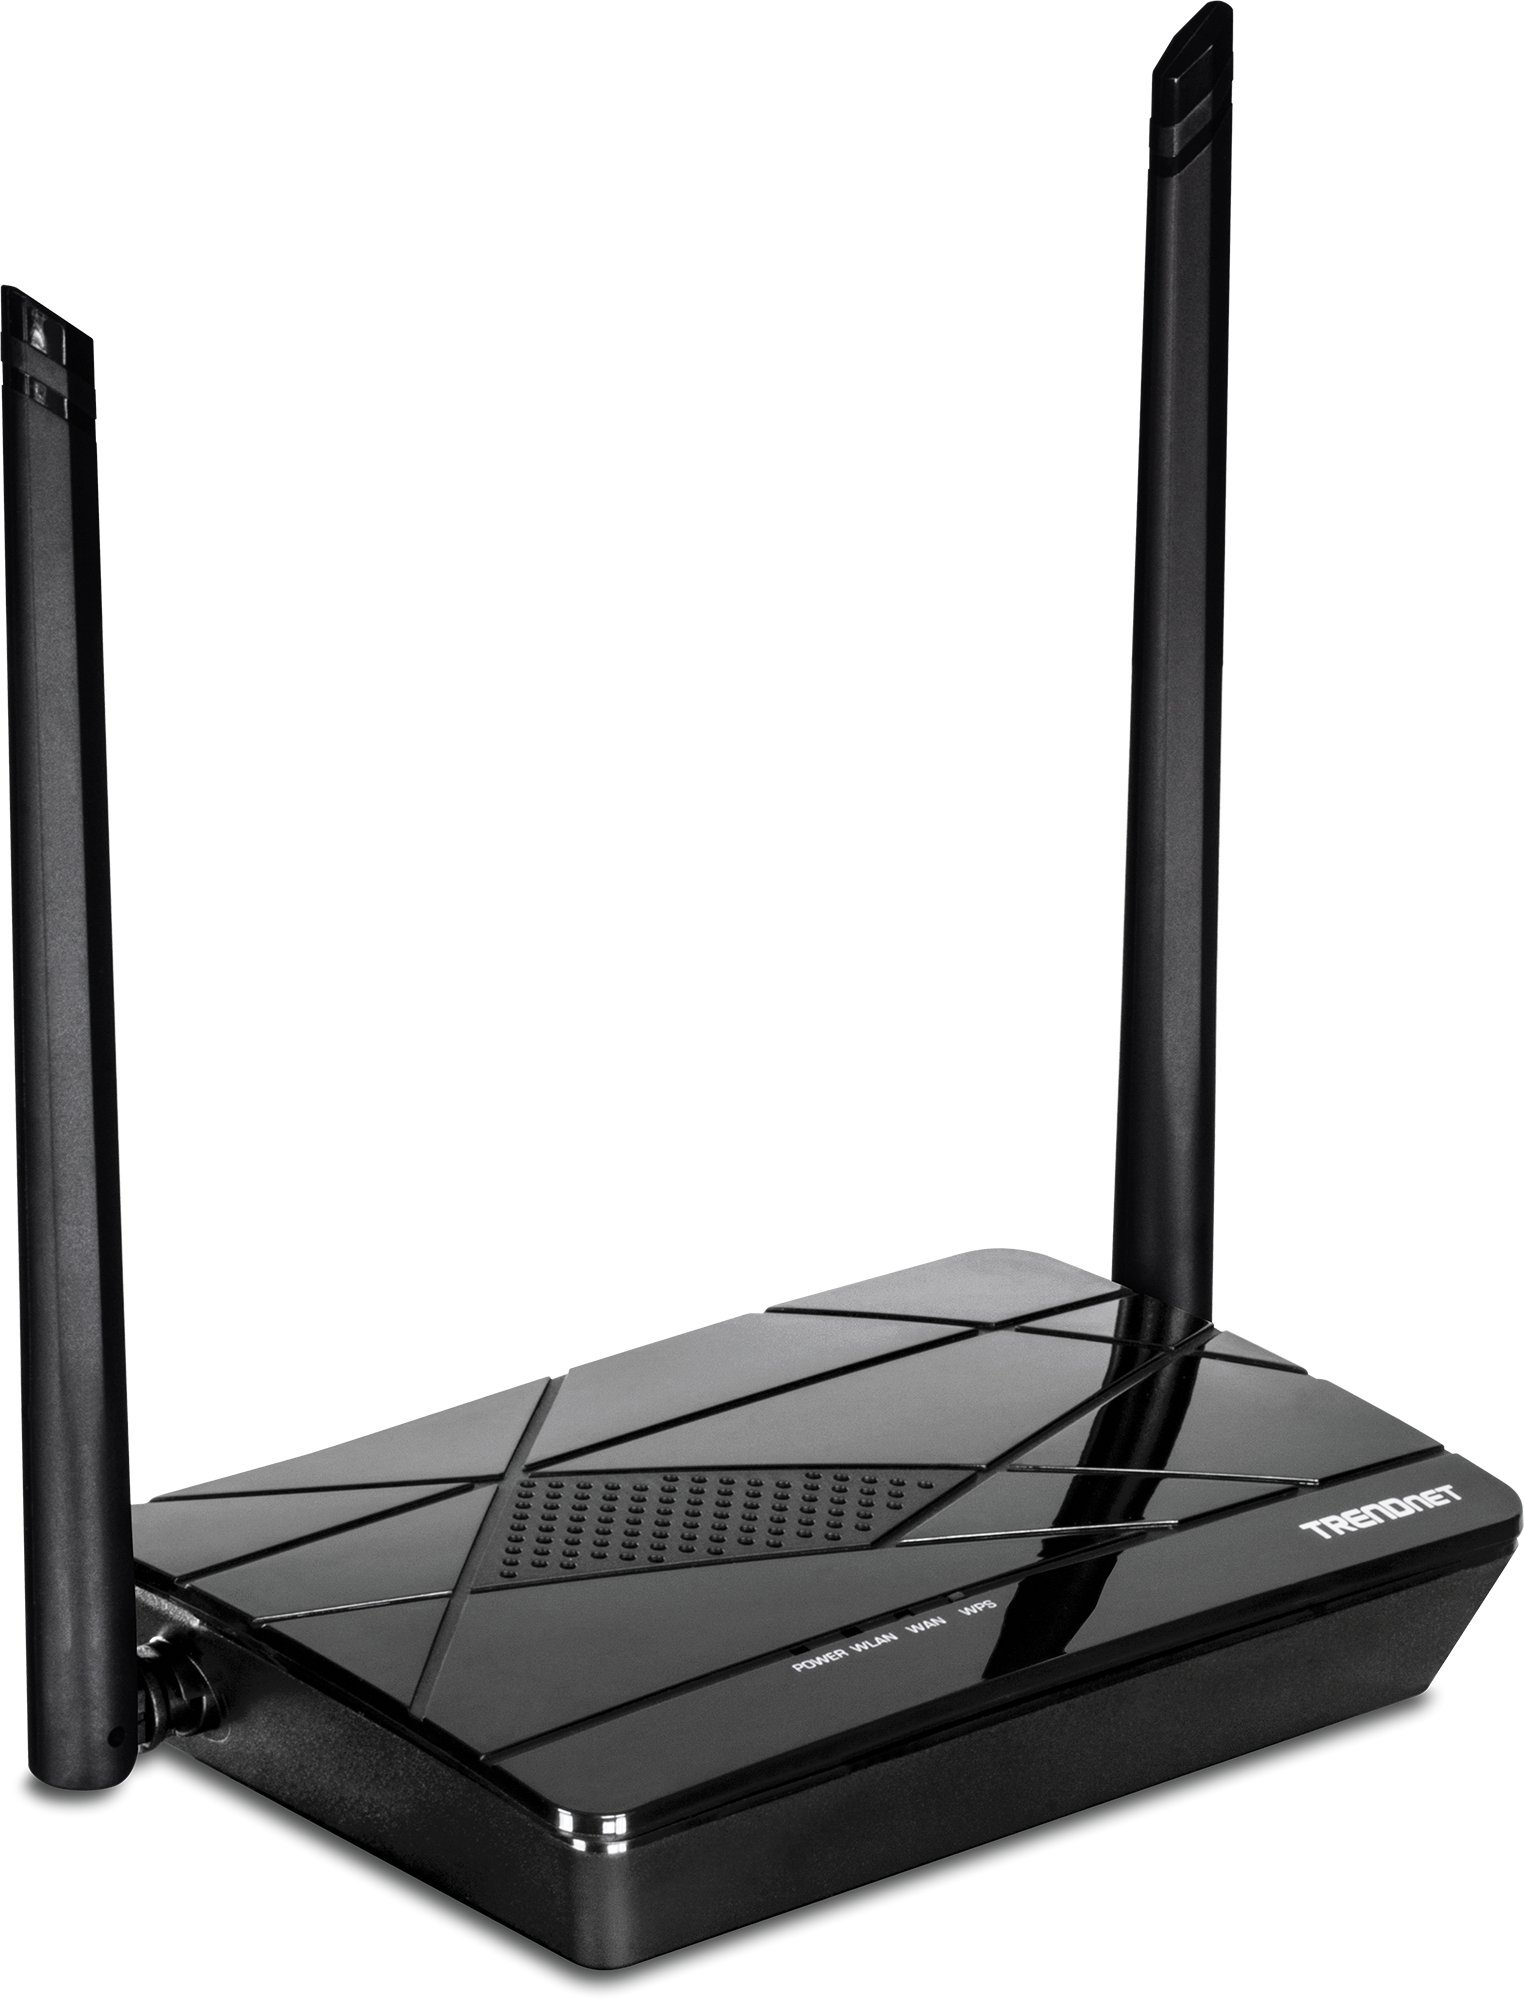 Wireless N 300Mbps Router Modem Home WiFi Router Internet Computer ...